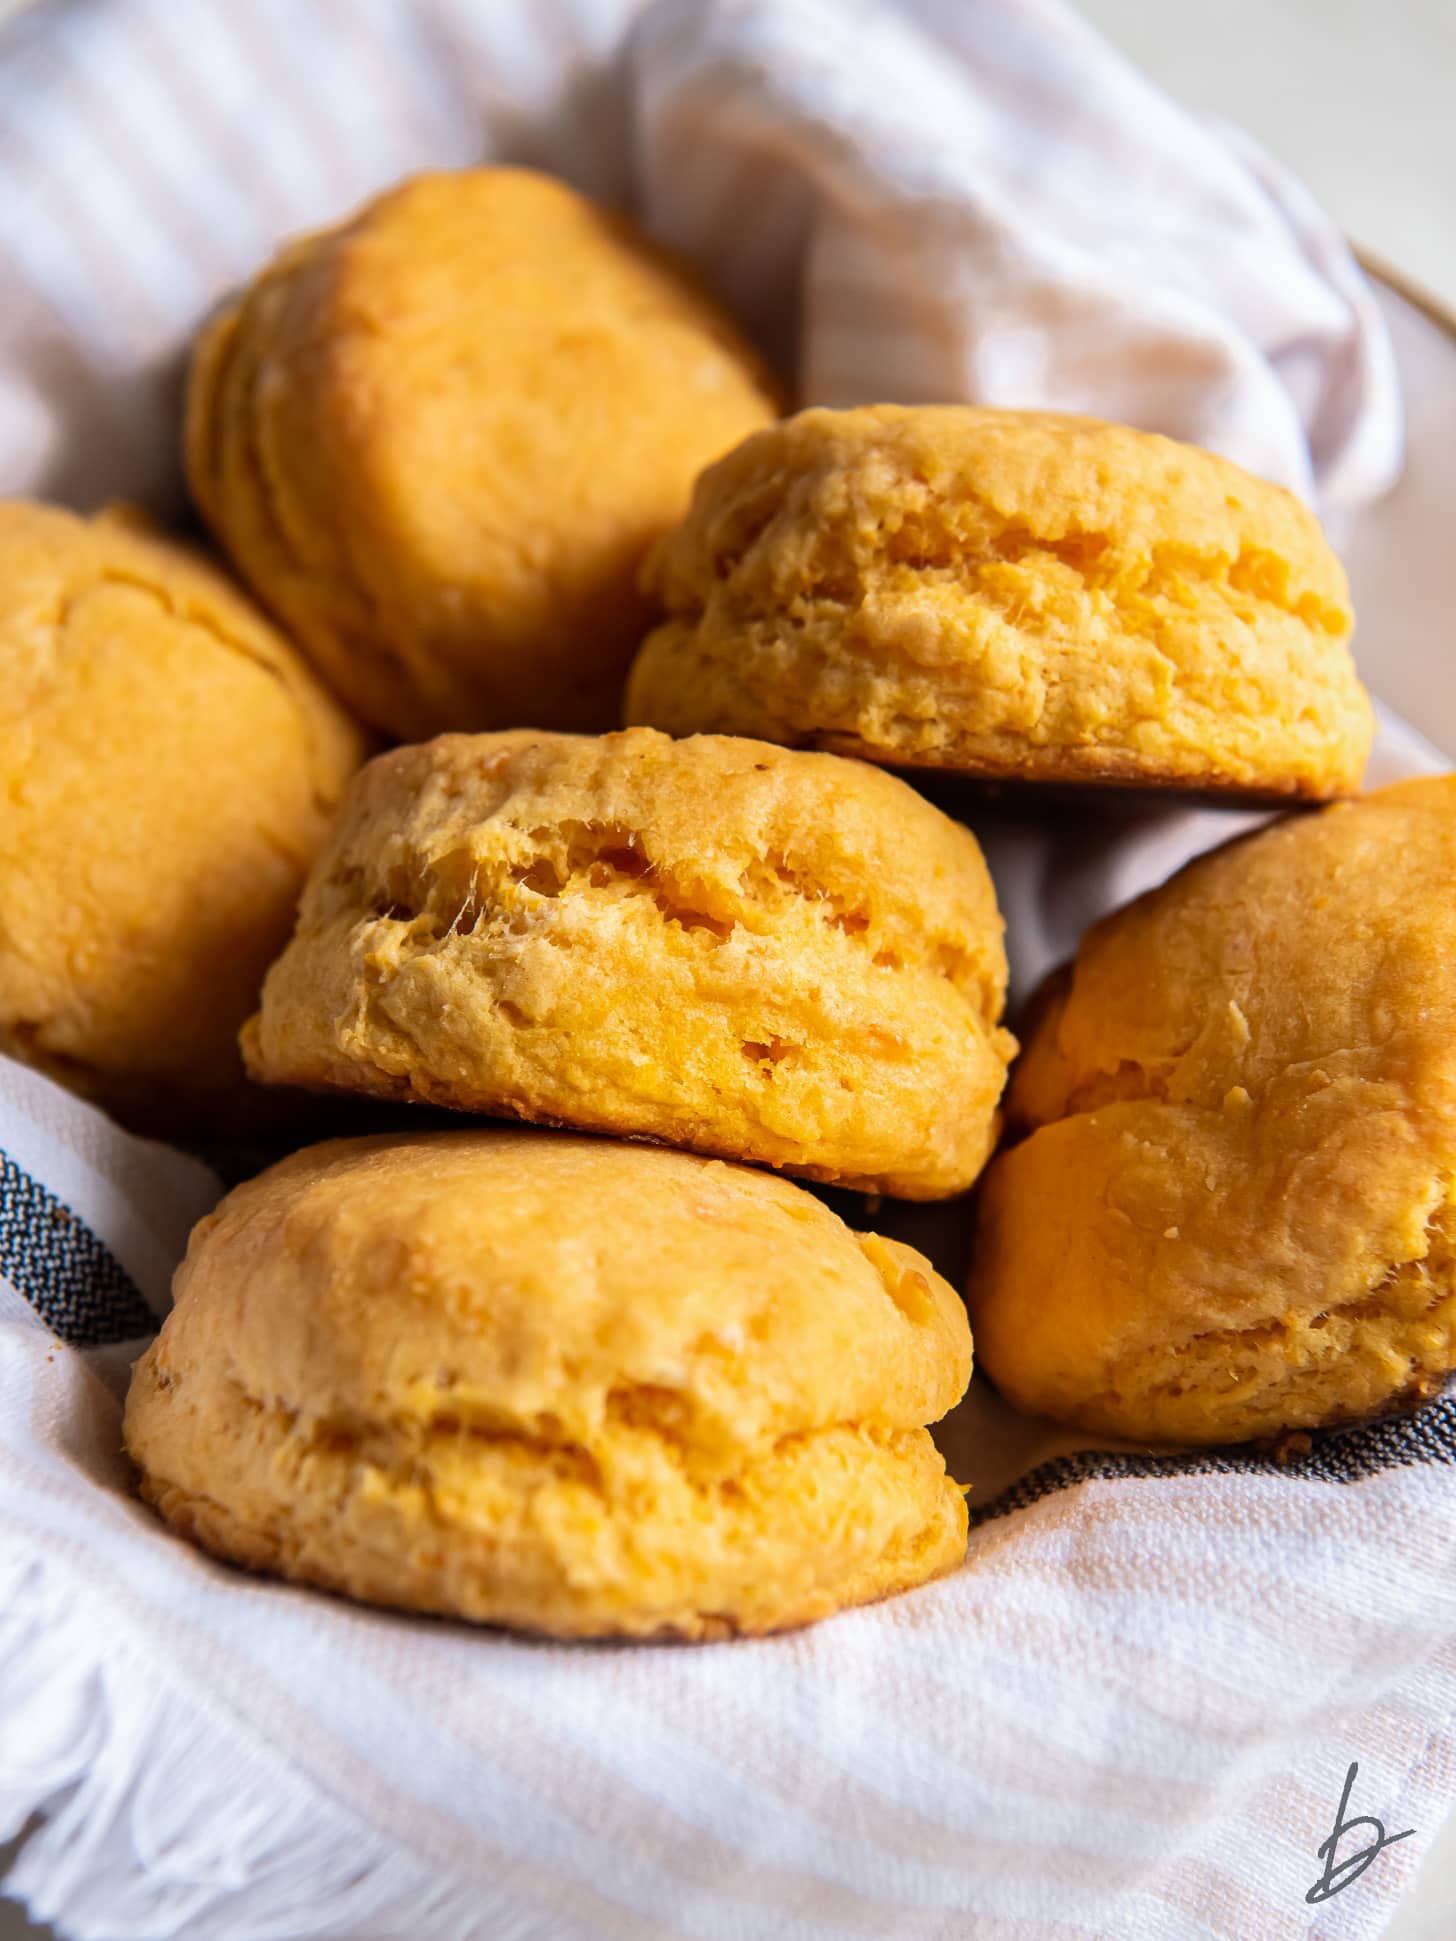 several sweet potato biscuits on a striped kitchen cloth in a bowl.